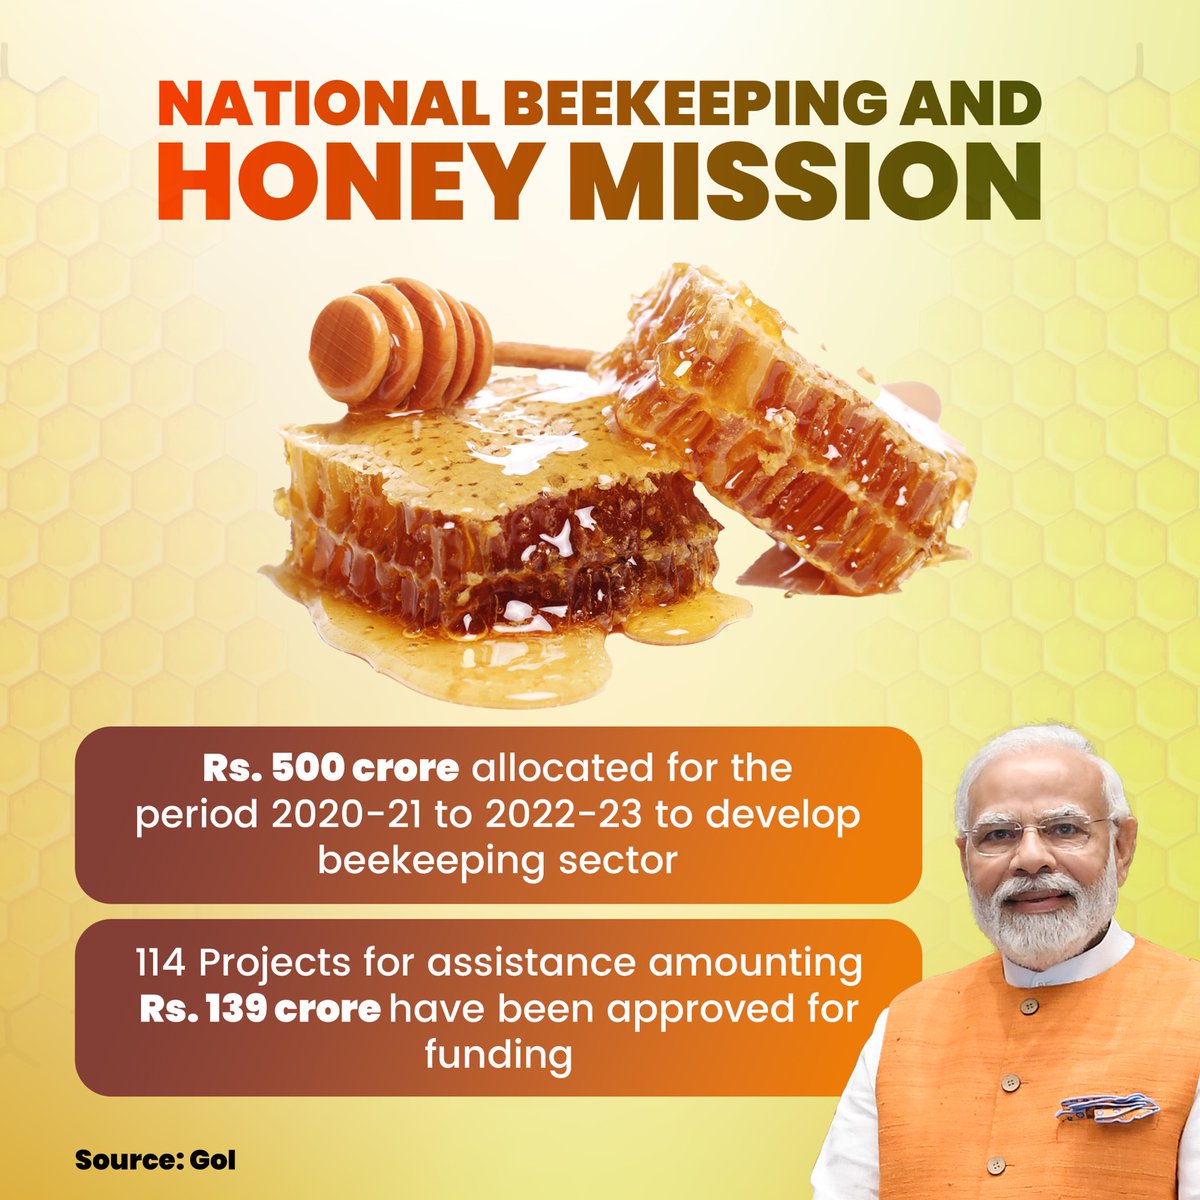 Under Modi Govt, the ongoing 'Sweet Revolution' is ushering in unparalleled transformation!

The resulting increase in farmers' incomes and the increased crop-productivity due to the pollen grains spread by bees display well the strengthened beekeeping industry.

#WorldBeeDay